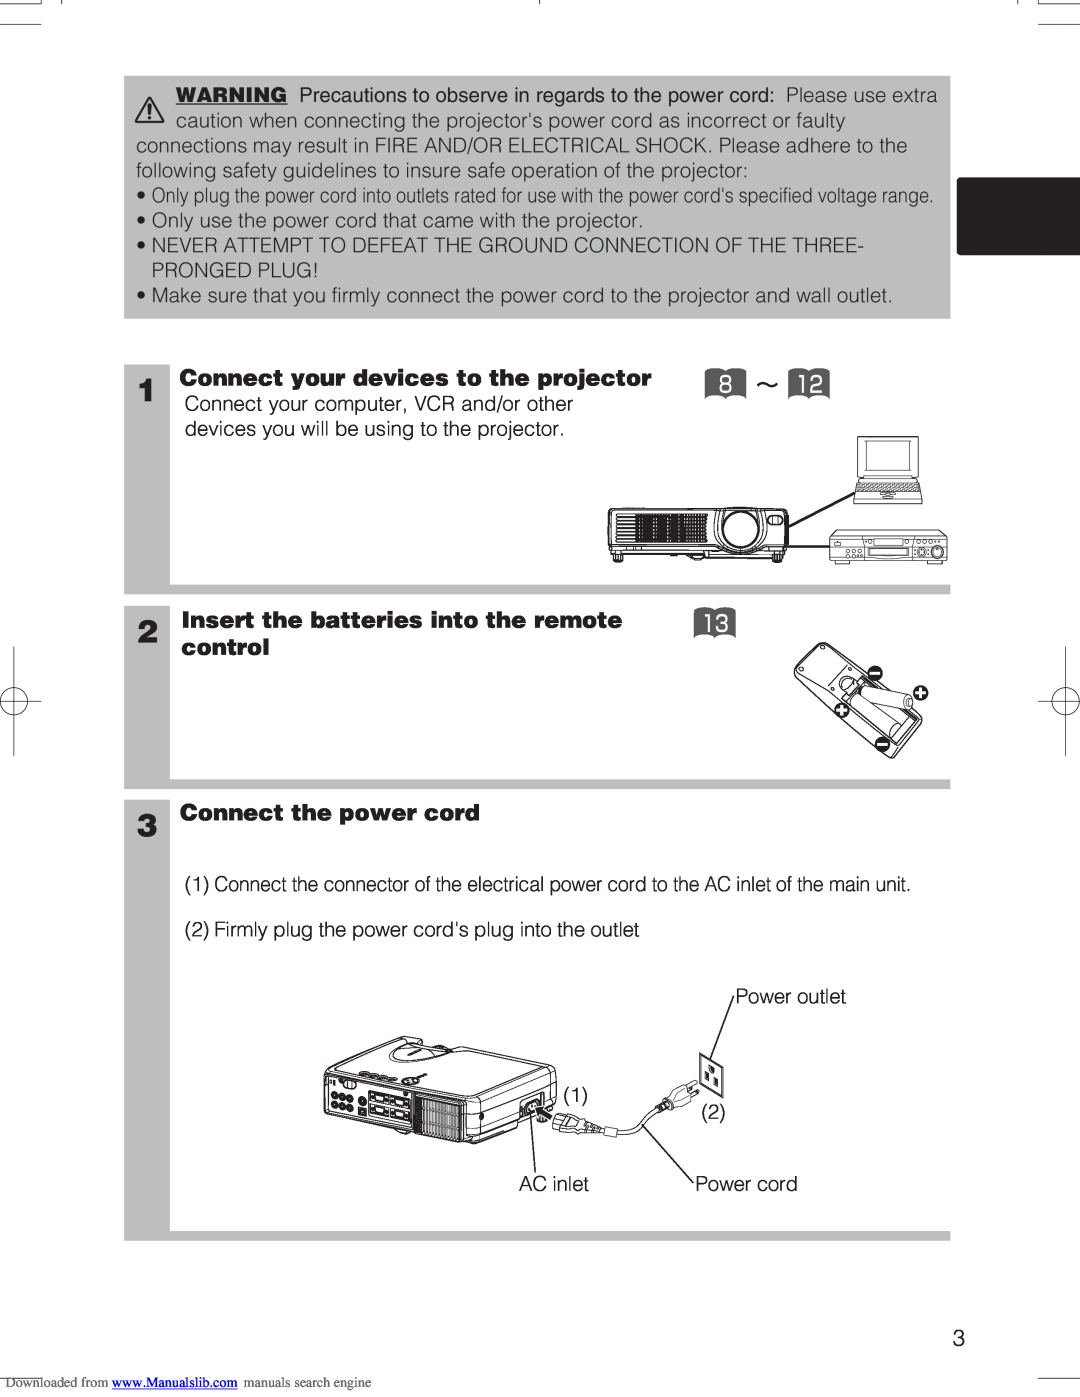 Hitachi CPX328W user manual Connect your devices to the projector, 8 ～, Insert the batteries into the remote, control 